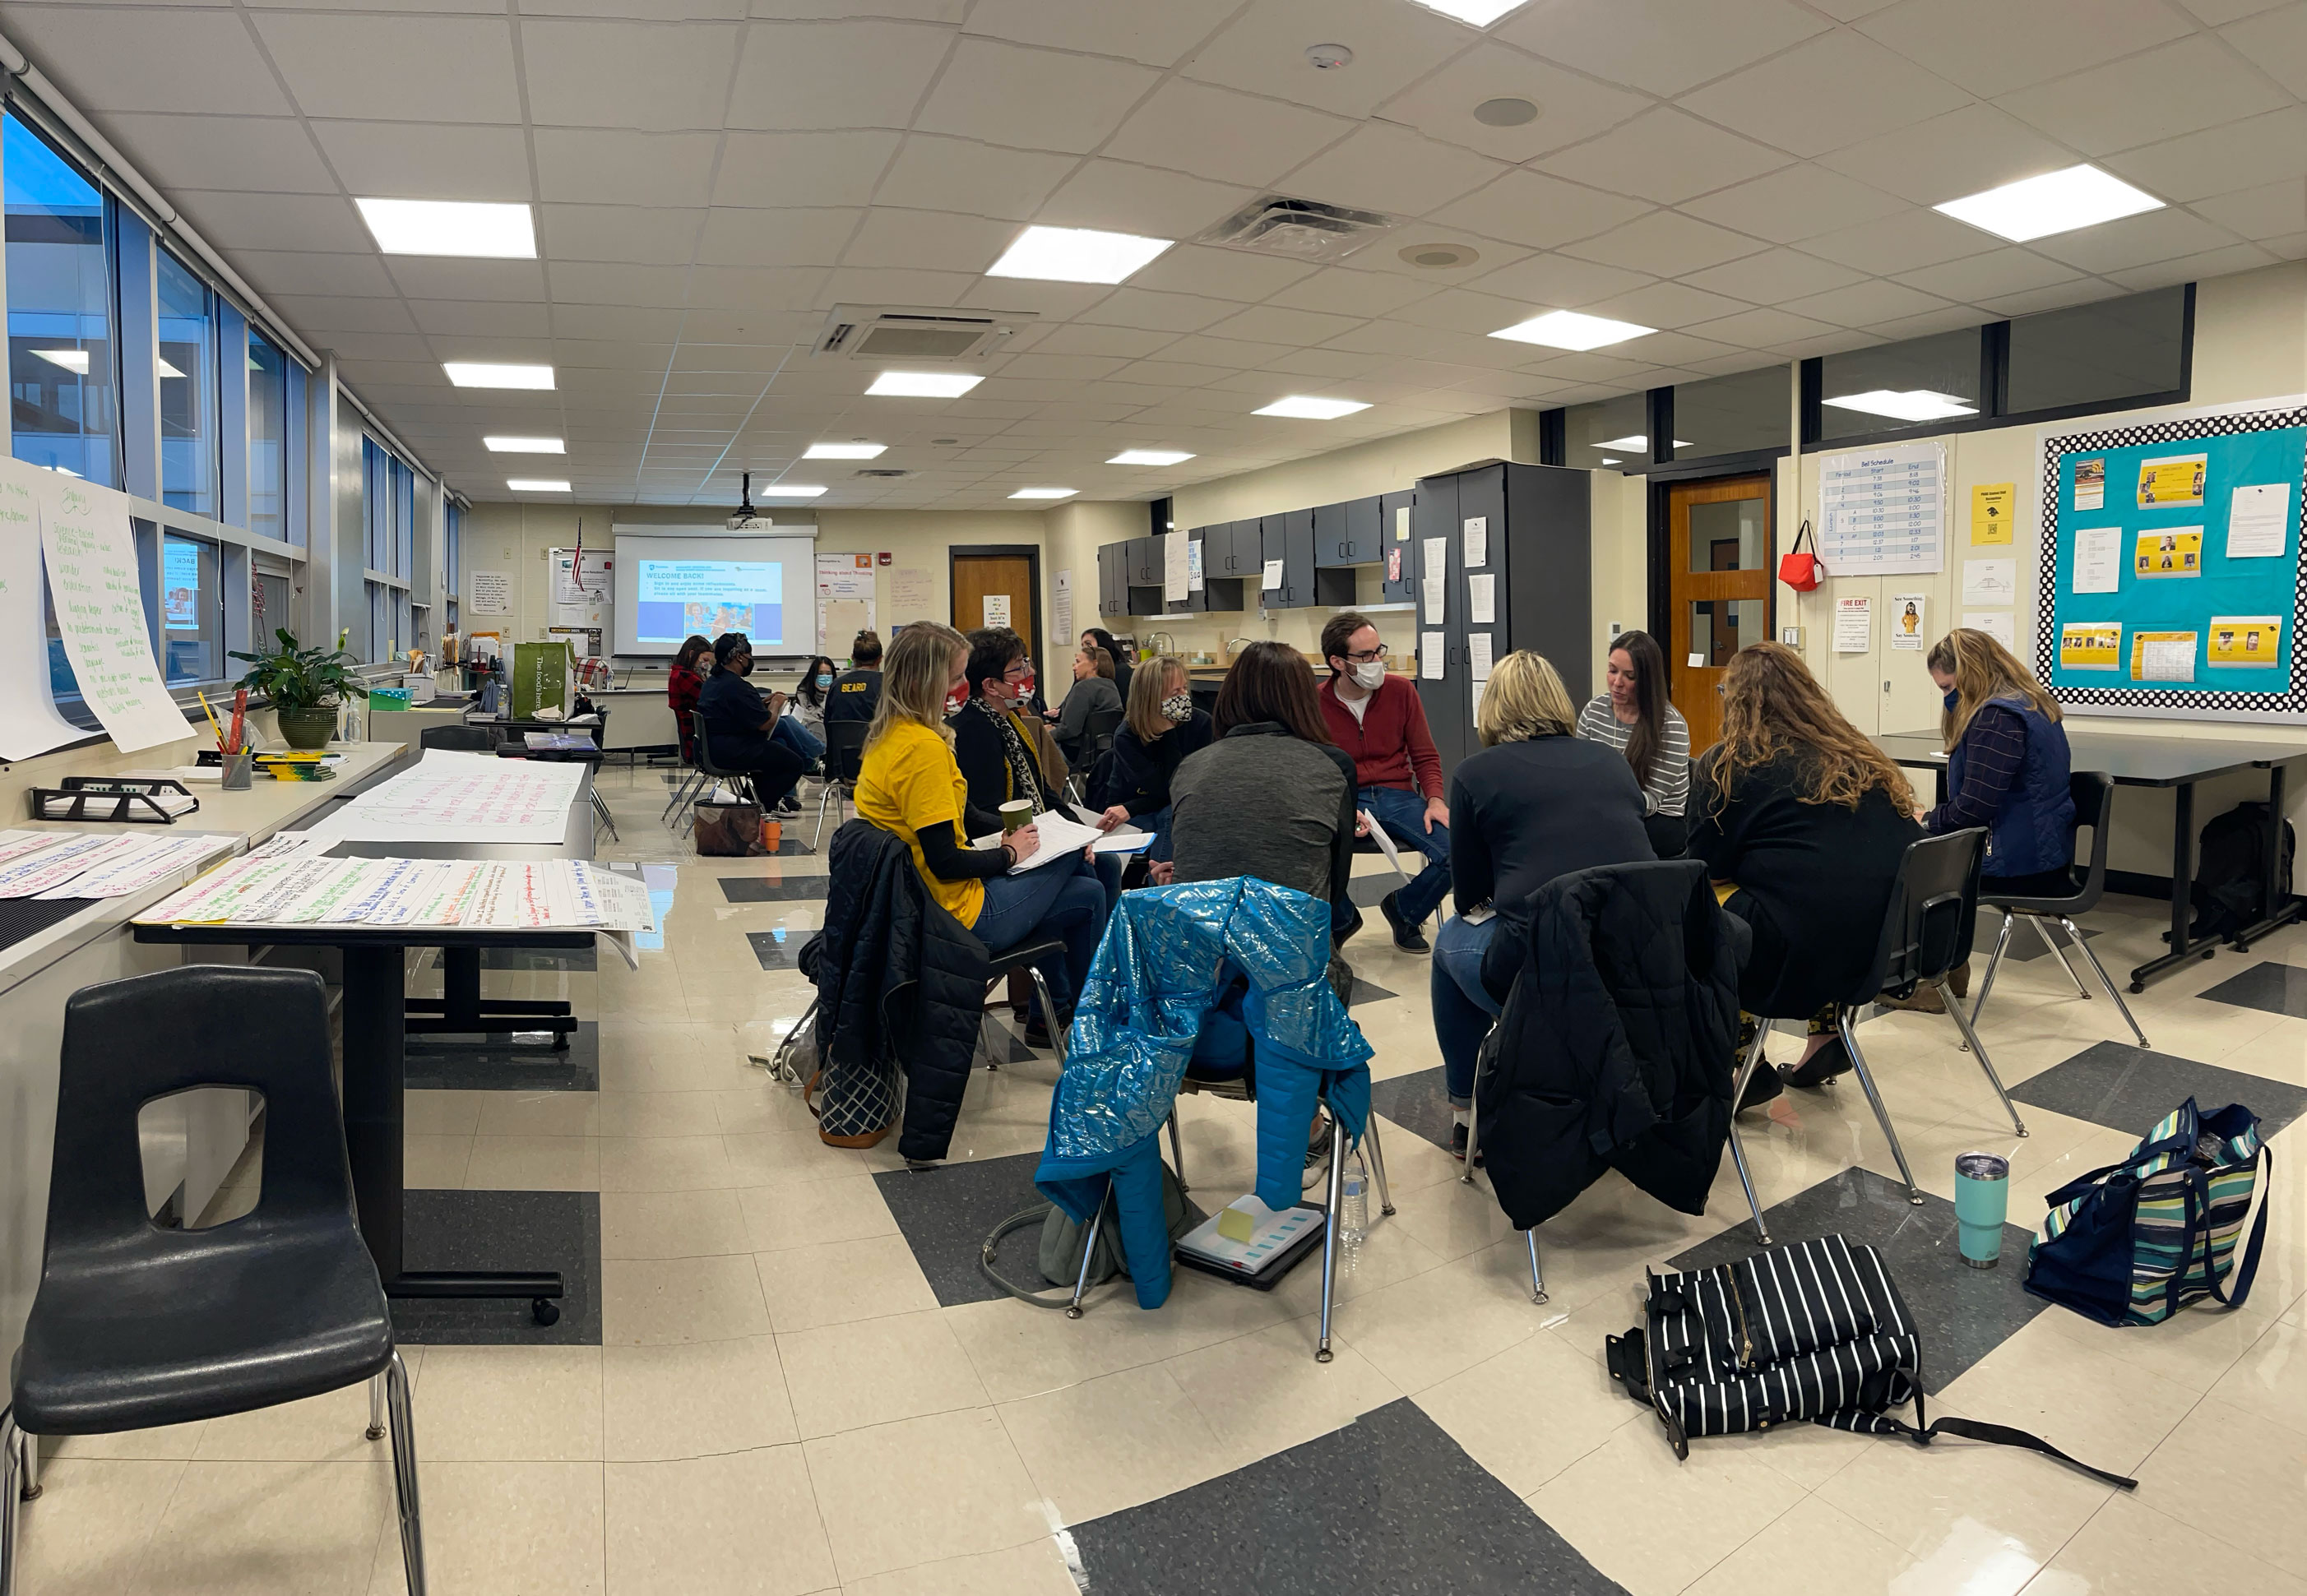 Teachers from Red Lion Area School District meeting for professional development initiative, courtesy Holocaust, Genocide and Human Rights Education Initiative